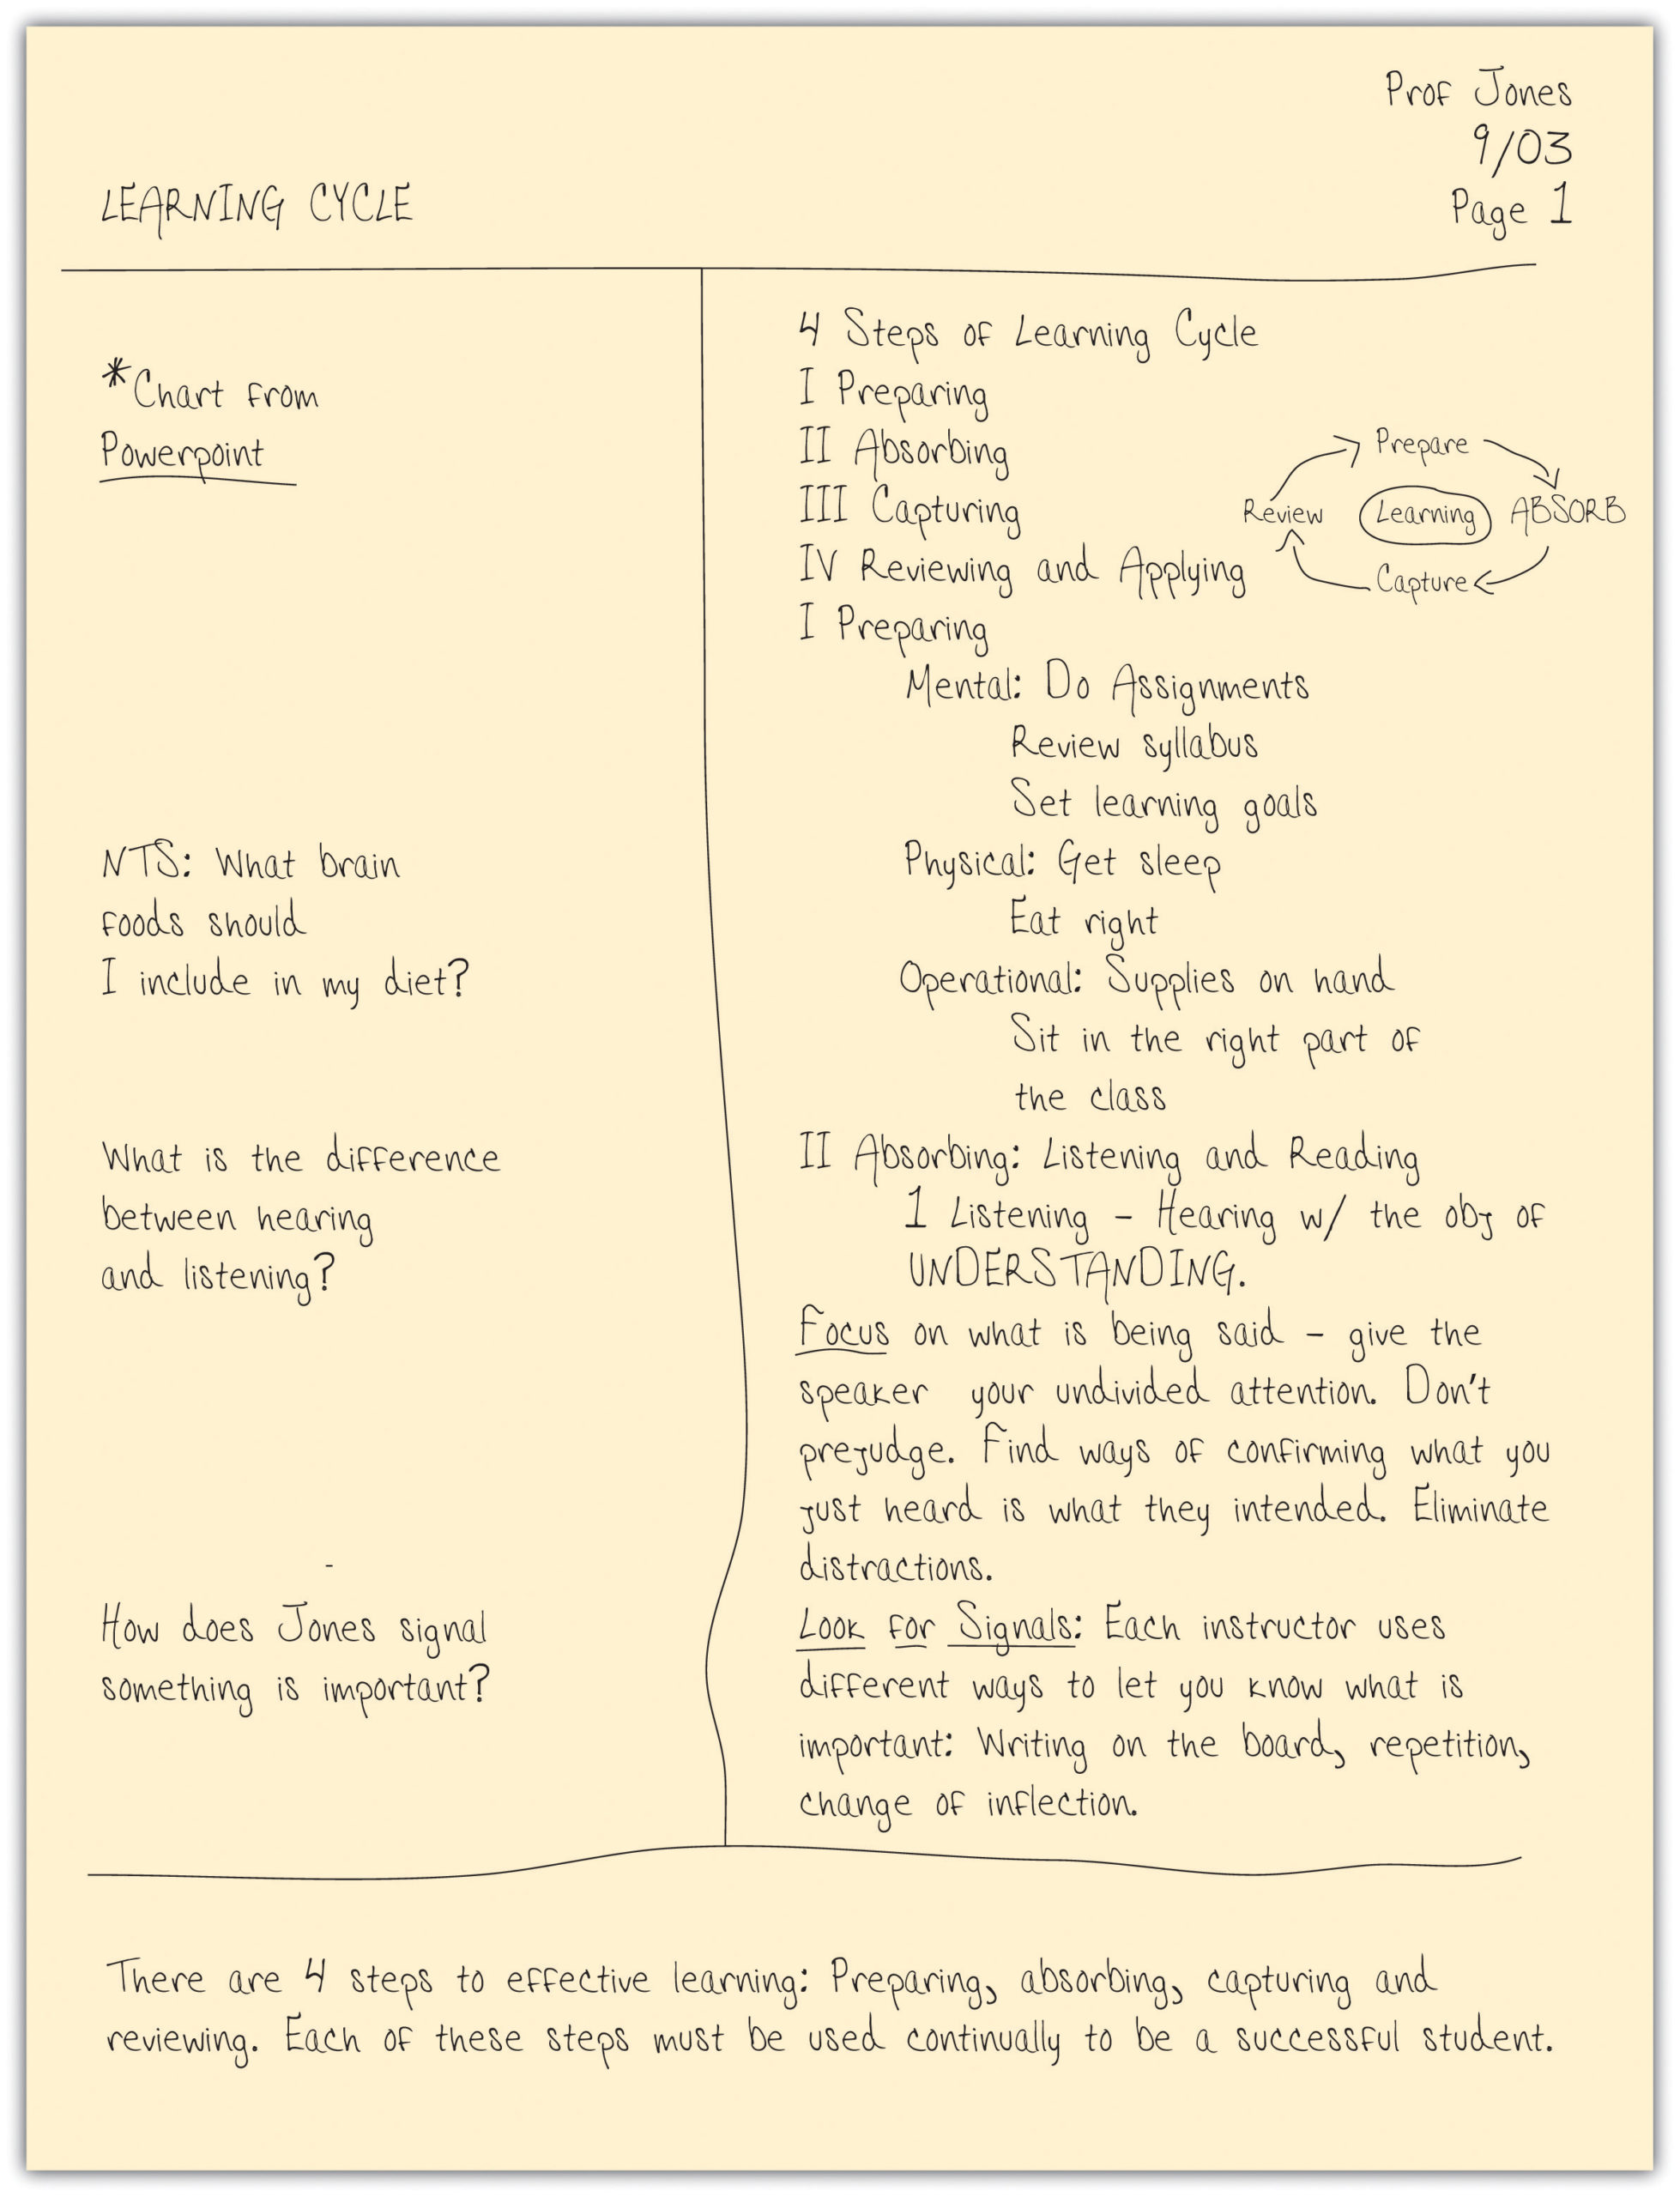 An example of the Cornell method of note-taking